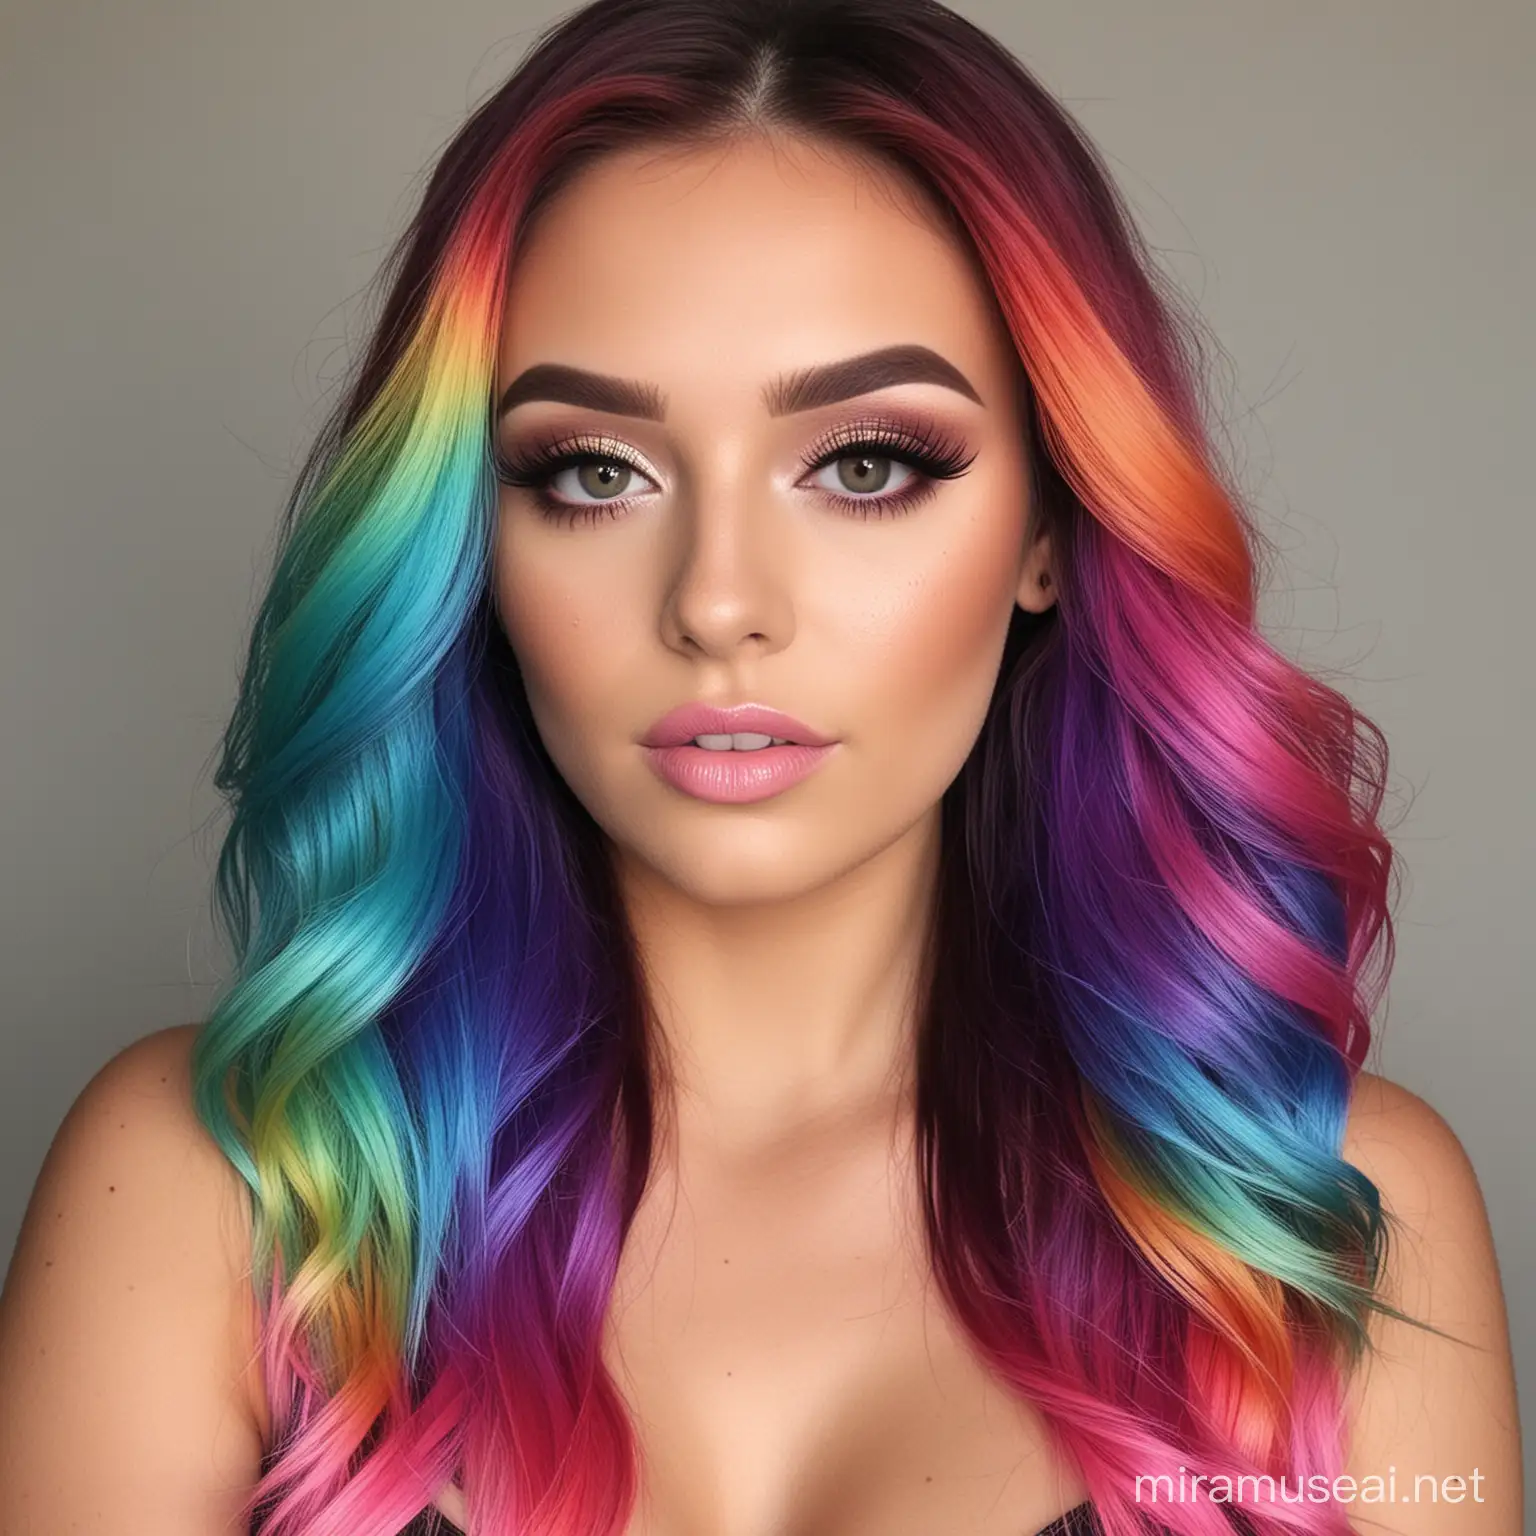 Vibrant Ombre Long Hair with Glittering Glam Makeup